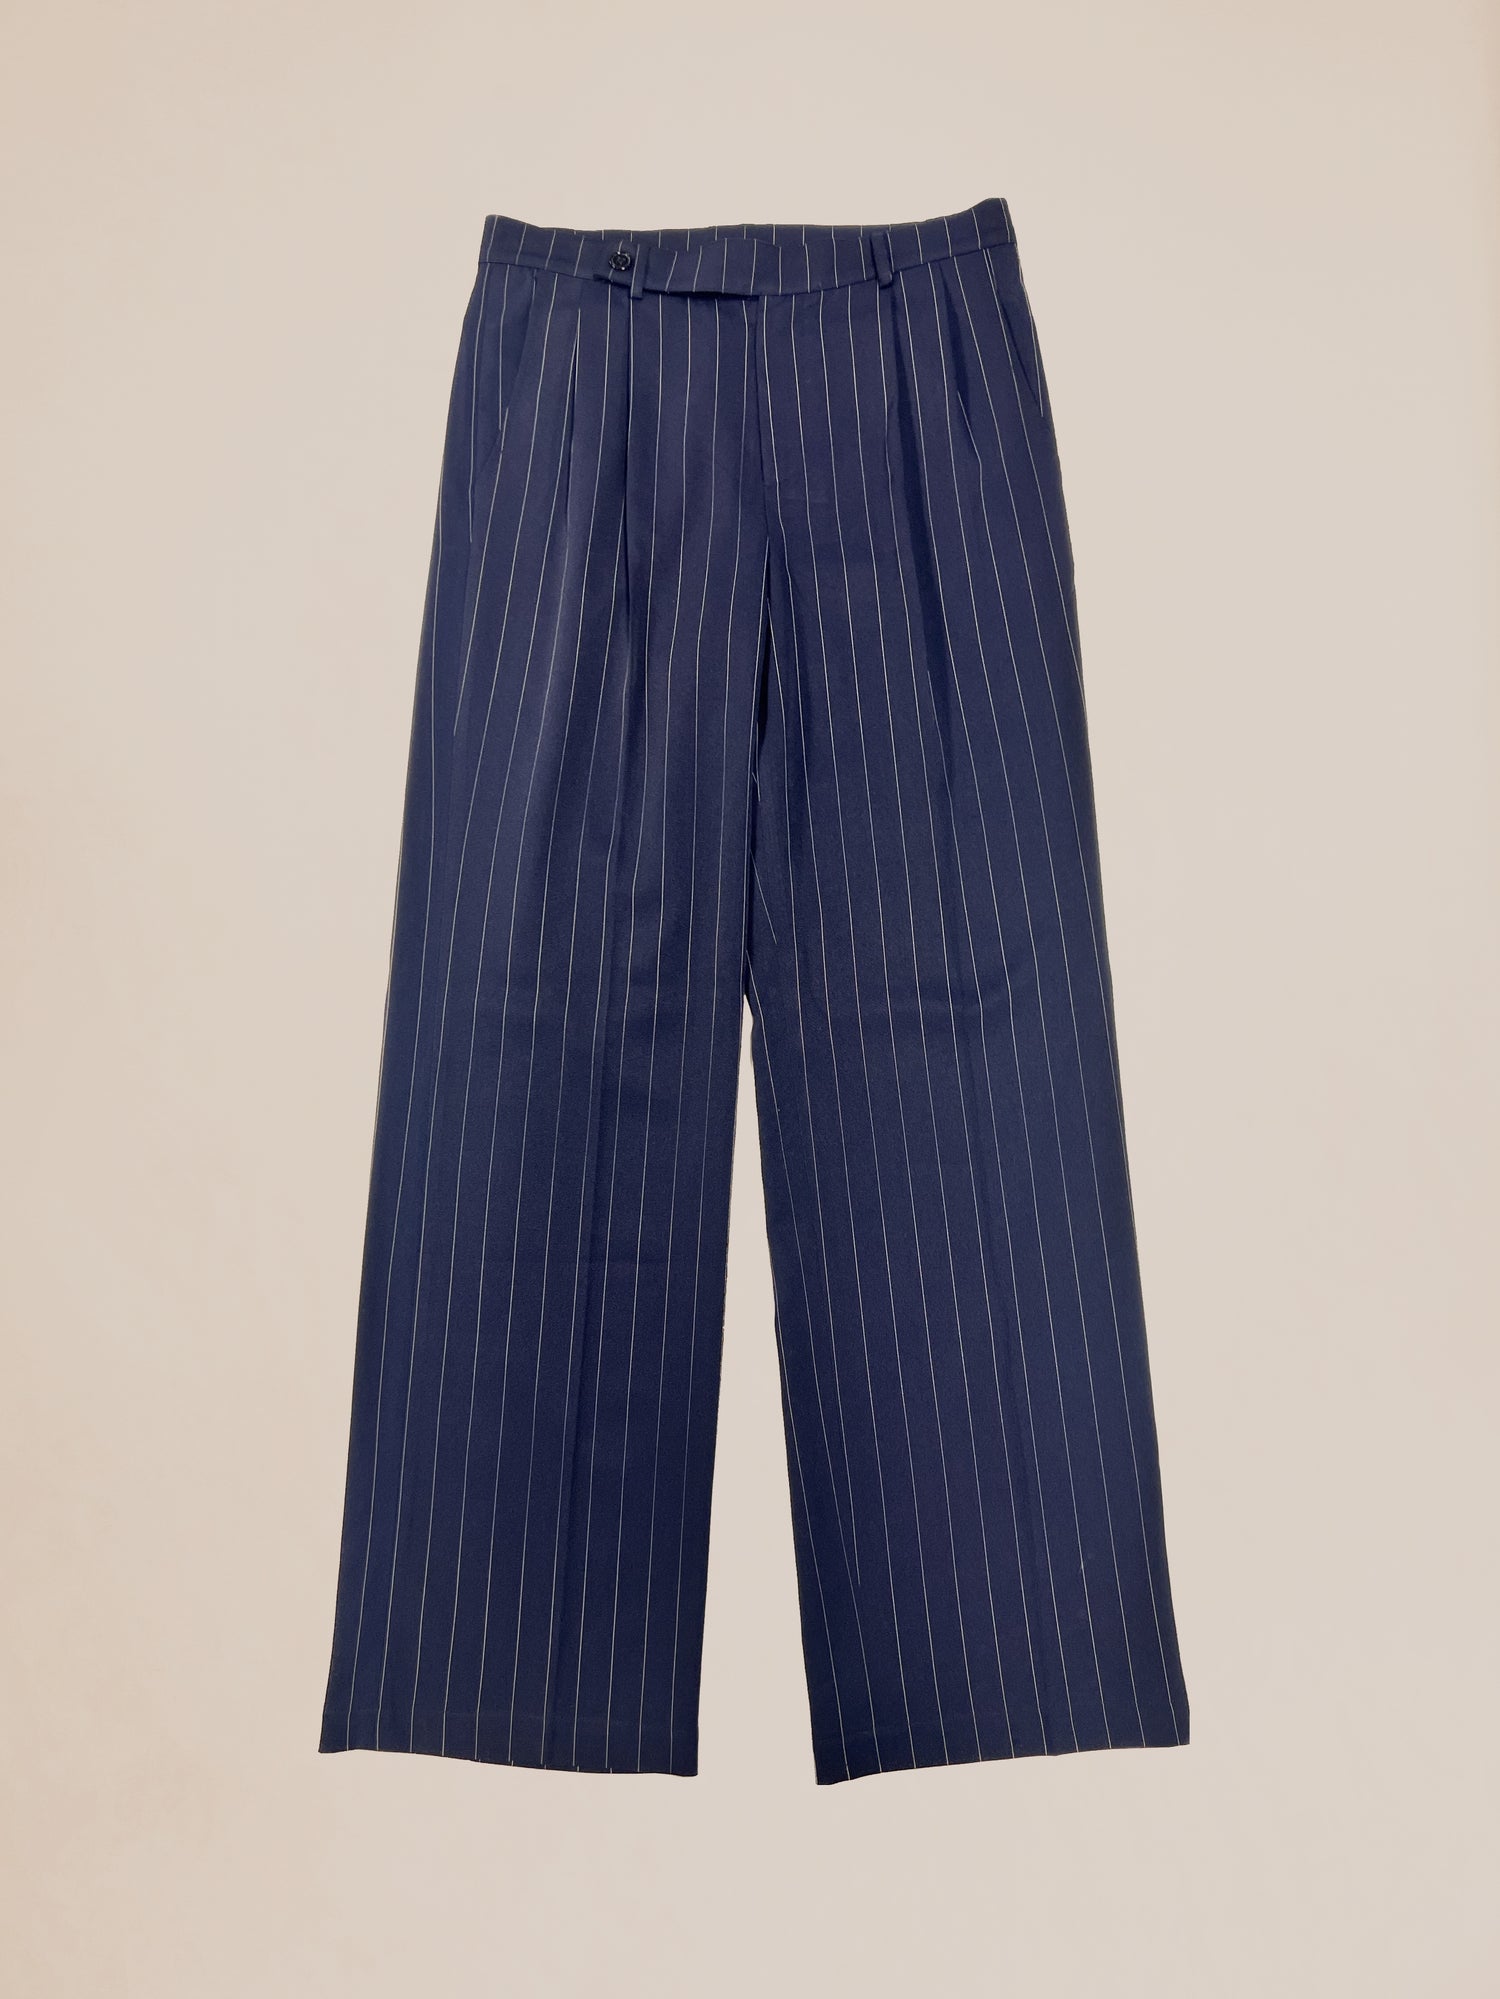 Profound Navy Pinstripe Trousers in size 32 waist on a neutral background.